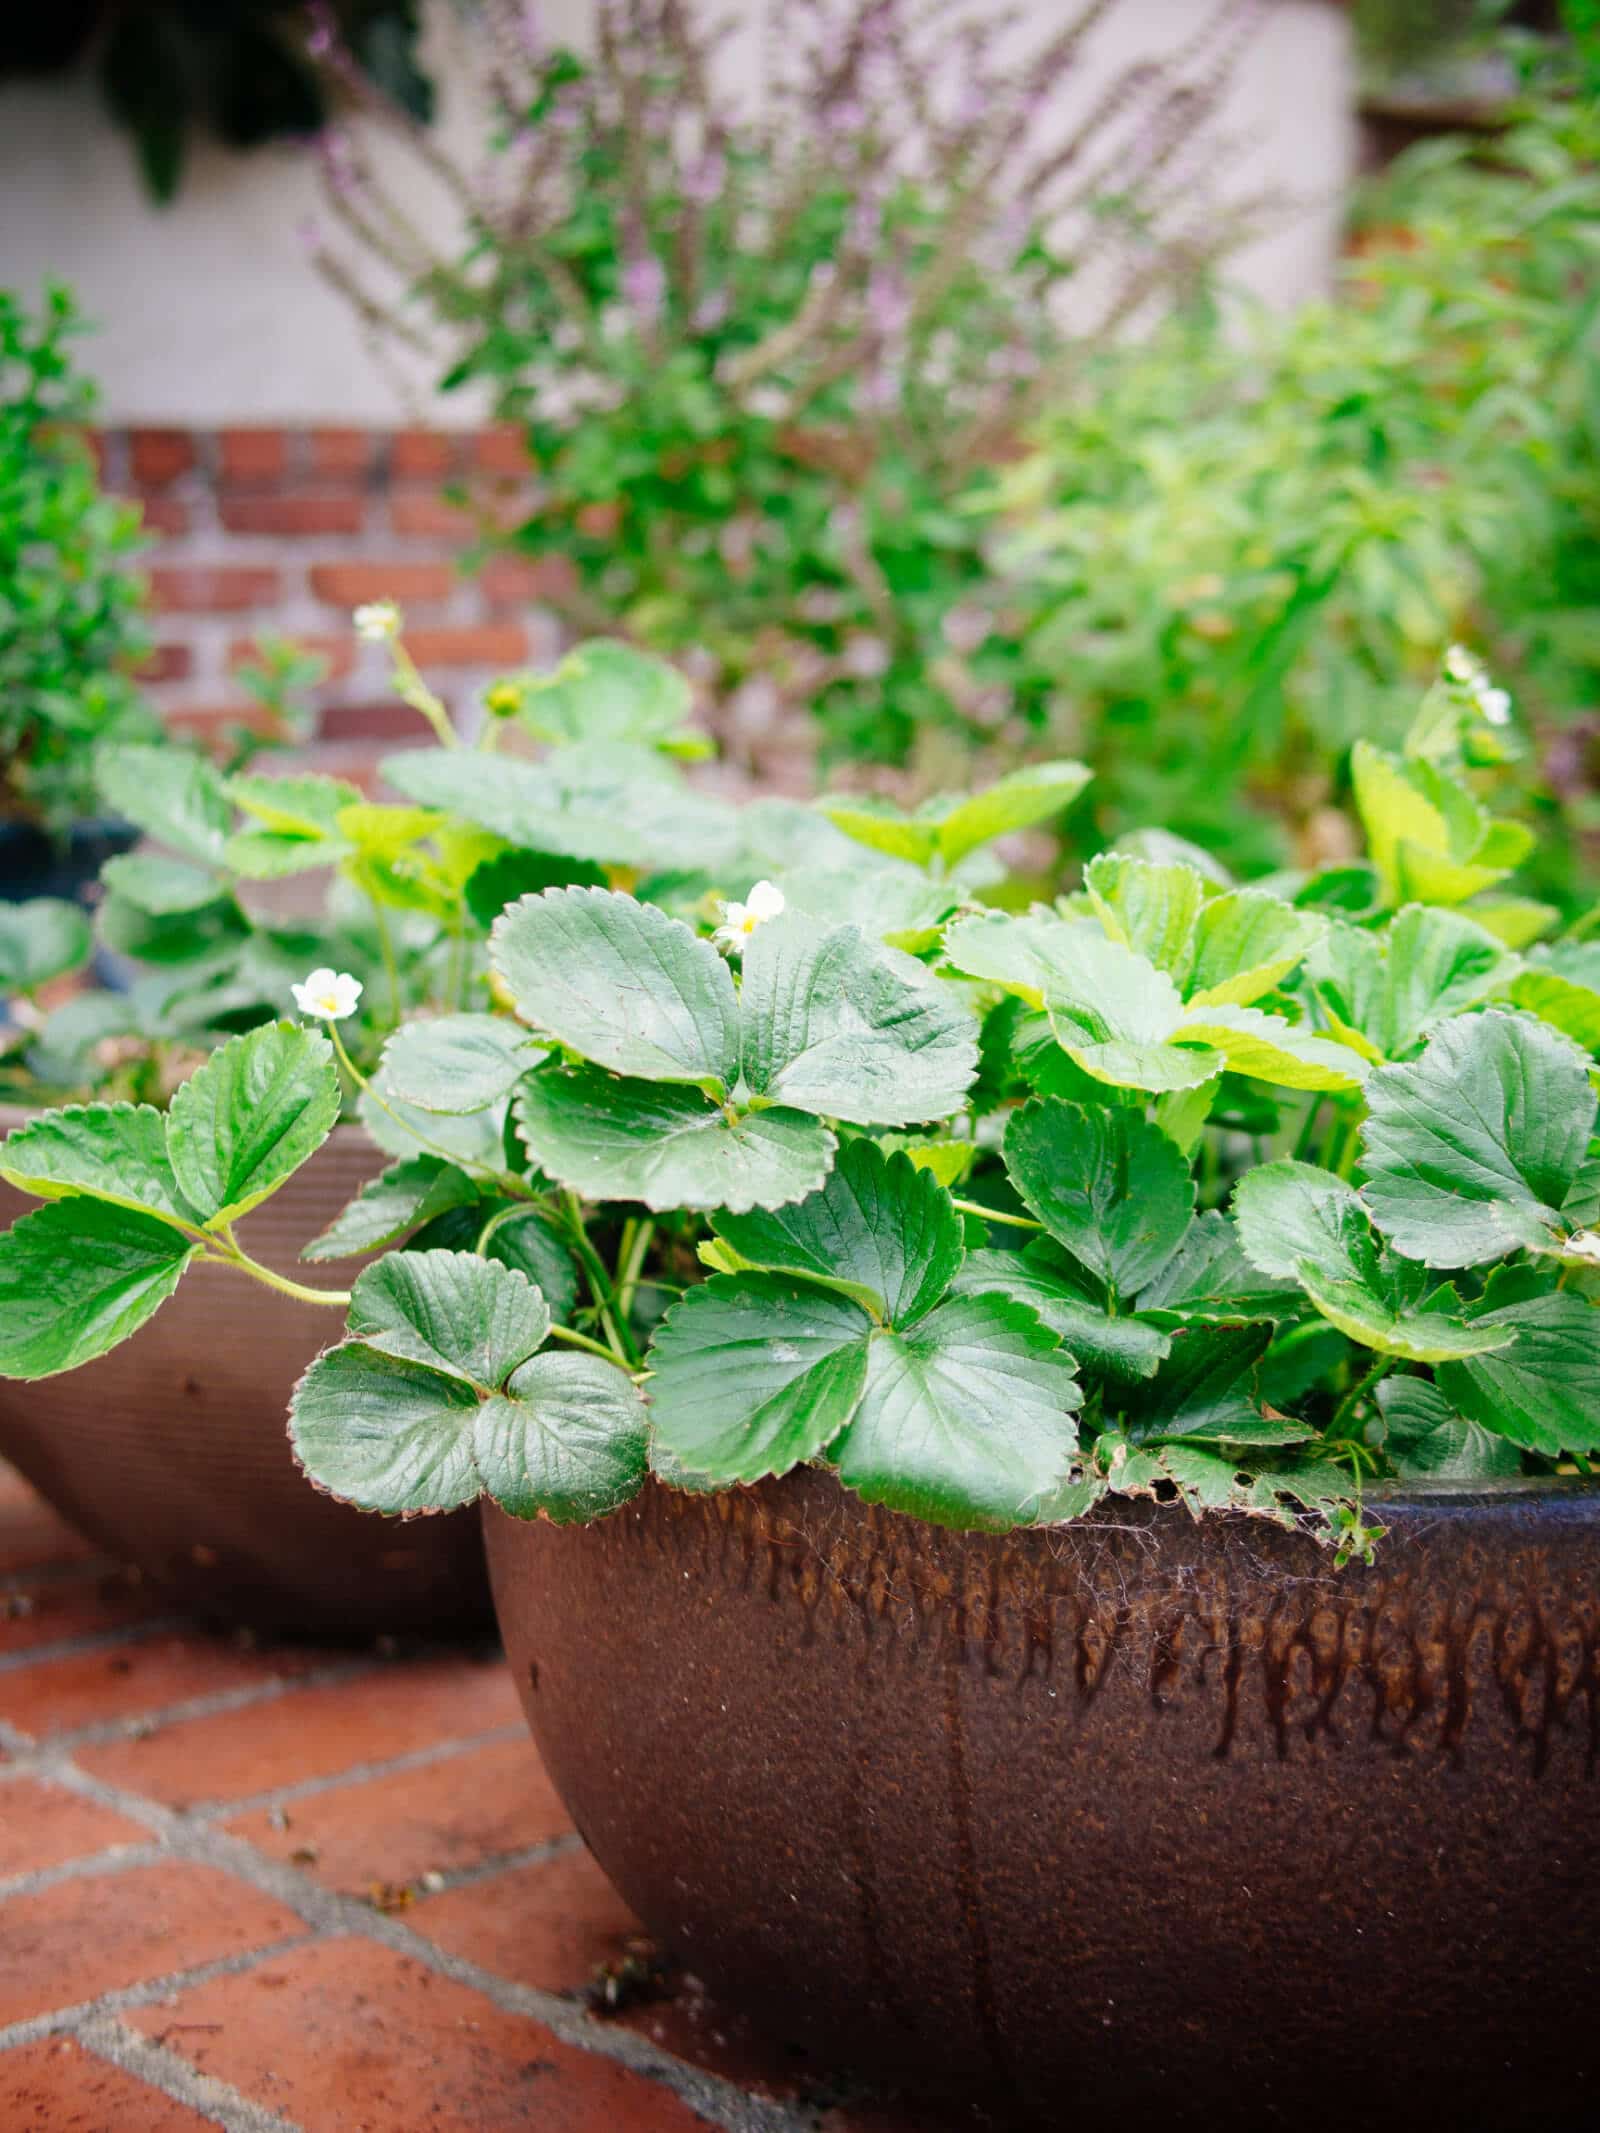 Strawberry plants do well in wide, shallow containers